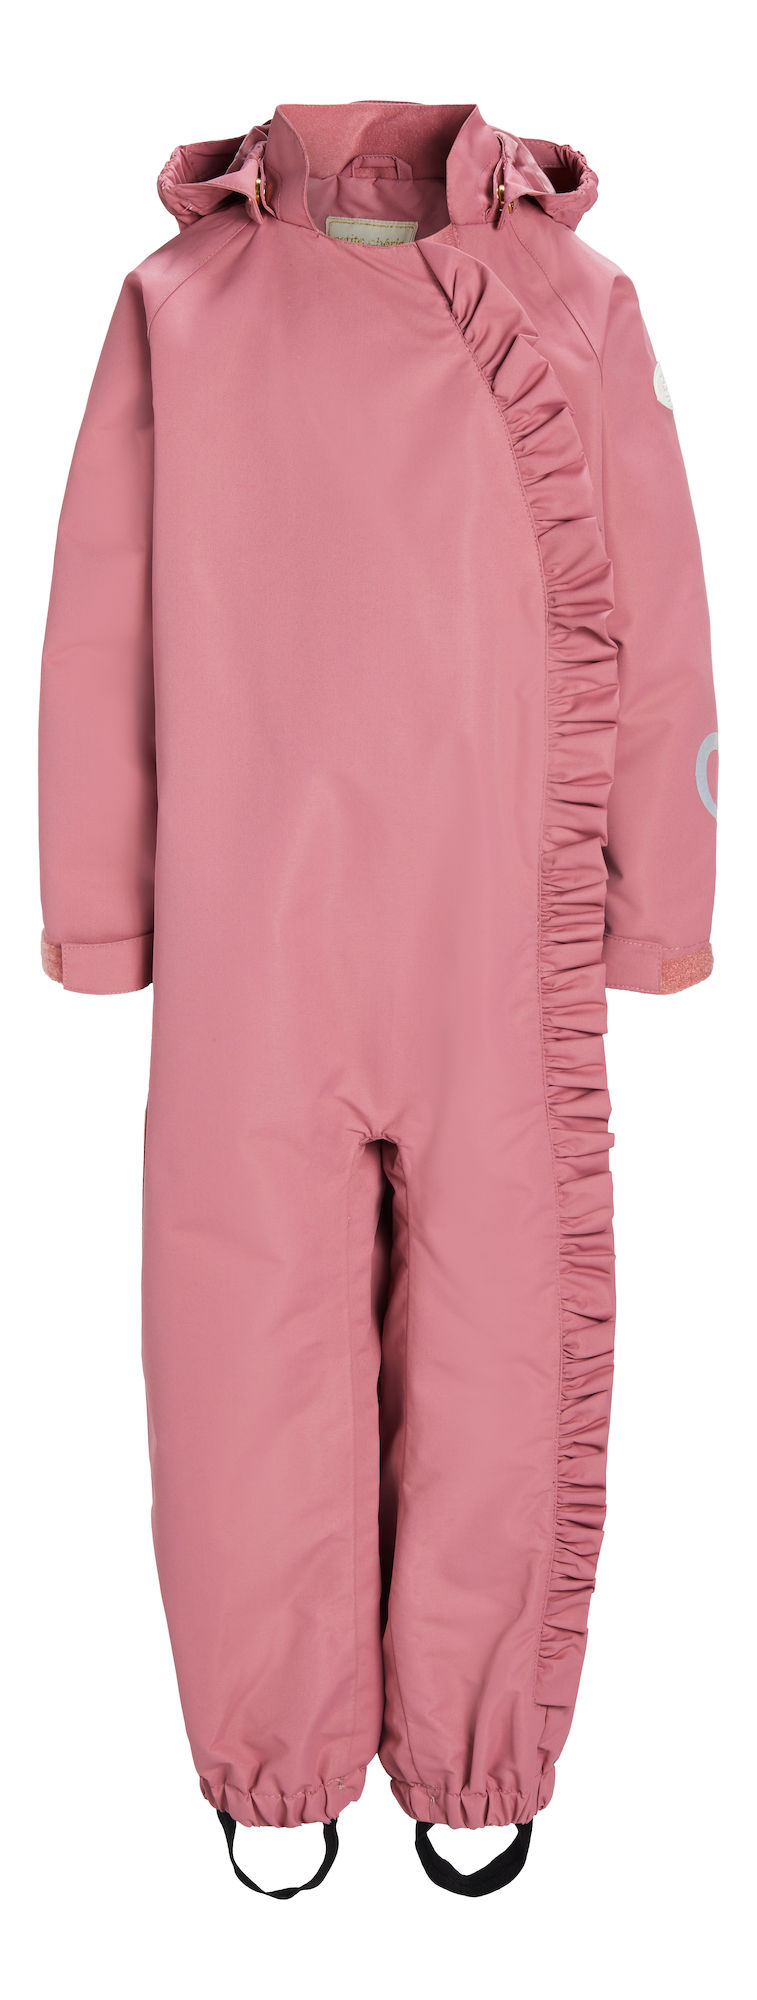 Petite Chérie Atelier Lily Skaloverall Pink 92